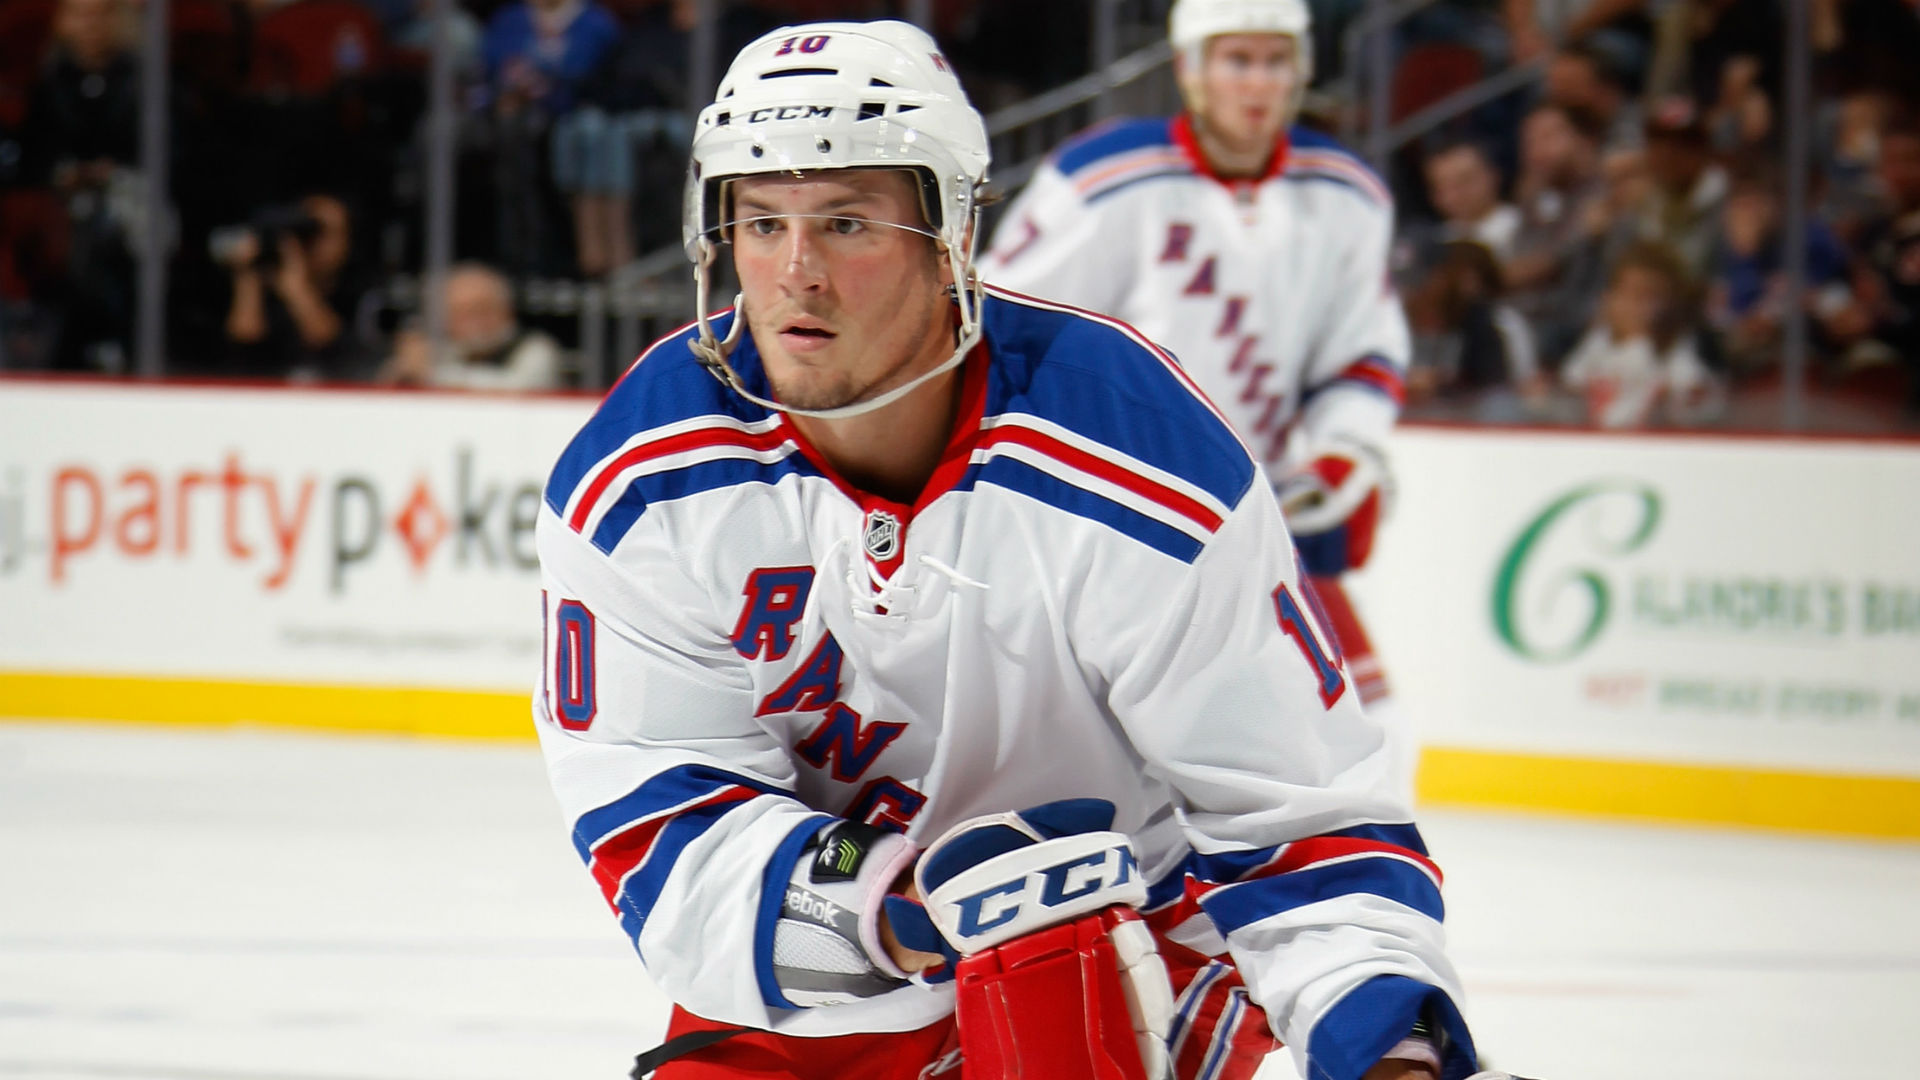 Dumping Miller a counterproductive move for Rangers NHL Sporting News